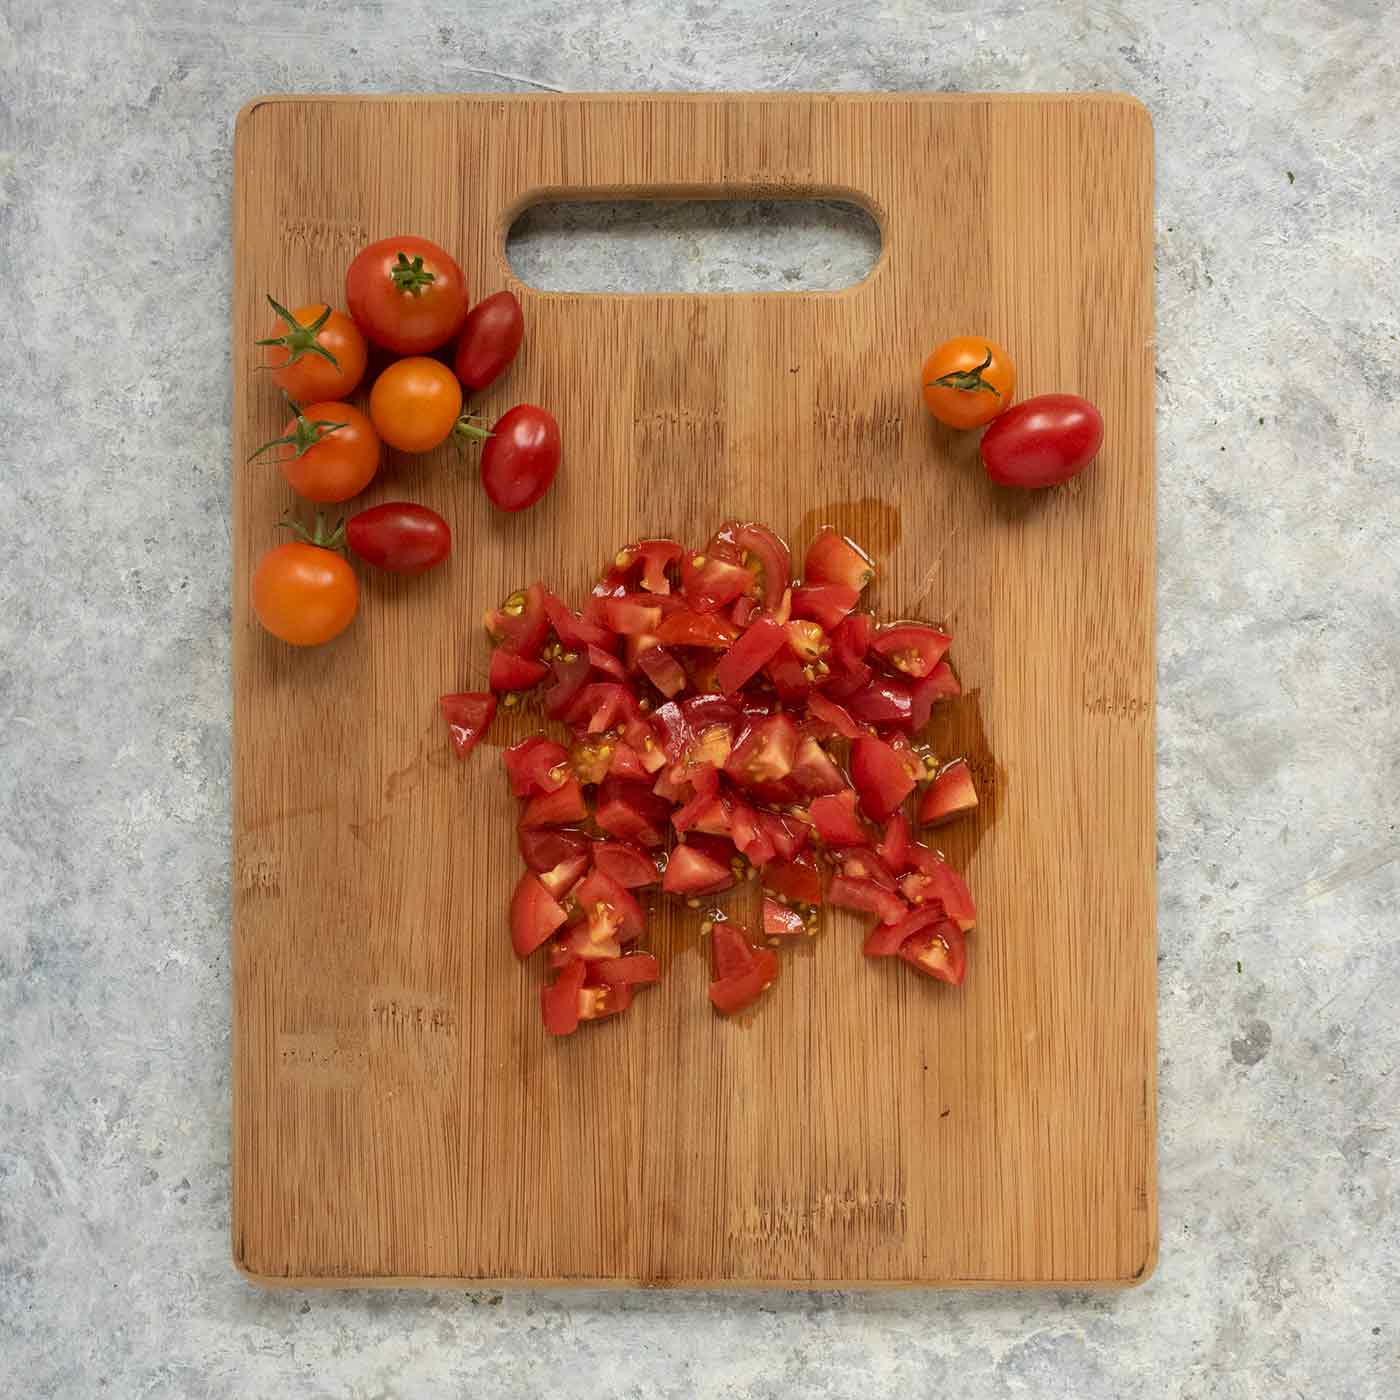 Chopped tomatoes on a cutting board.